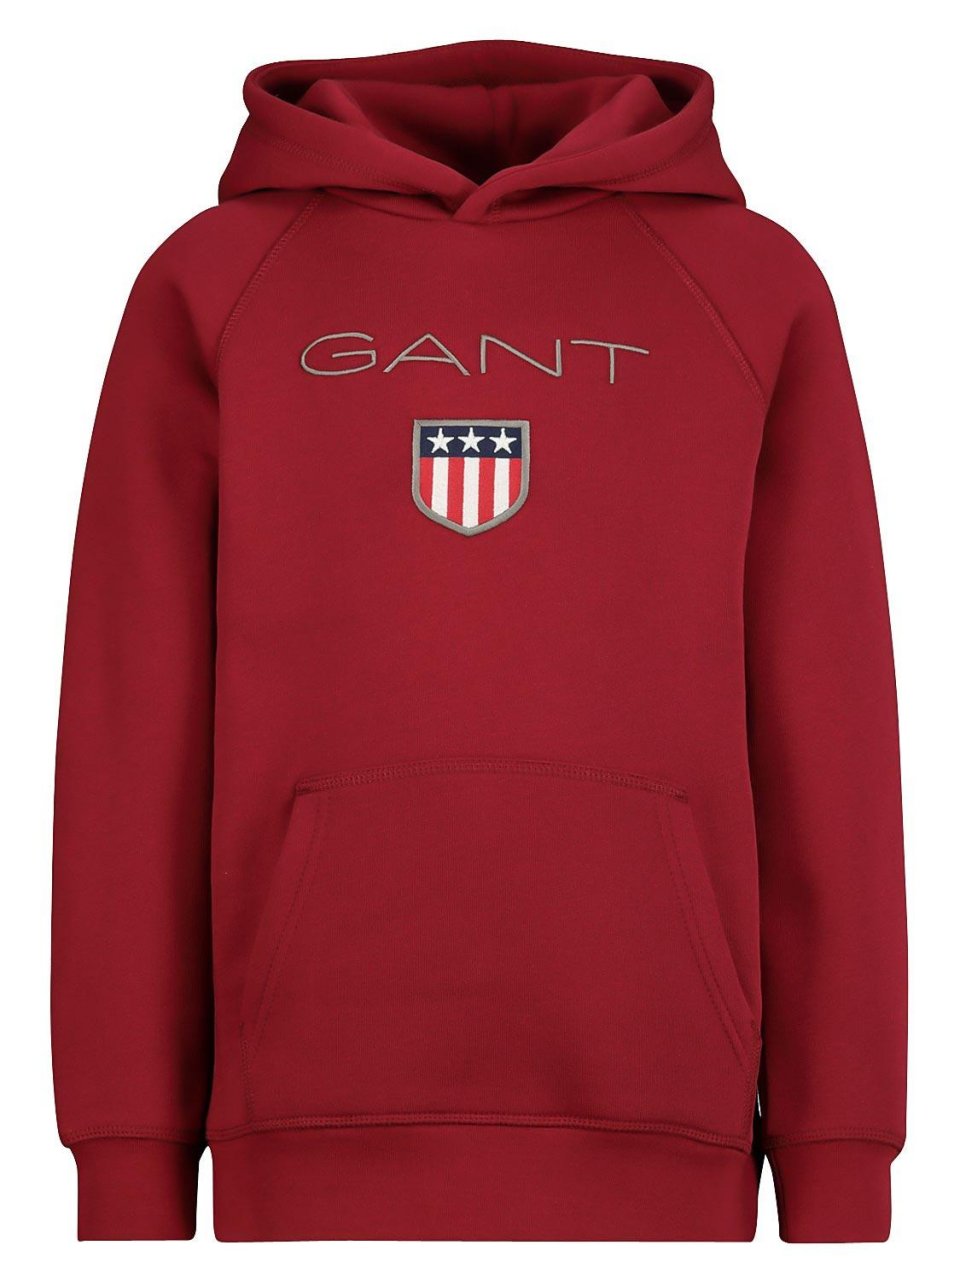 GANT KIDS AND TEENS CLOTHING 906652 RED SHIELD HOODIE APPIQUE BRANDED DETAIL  14,15 & 16YRS ONLY 